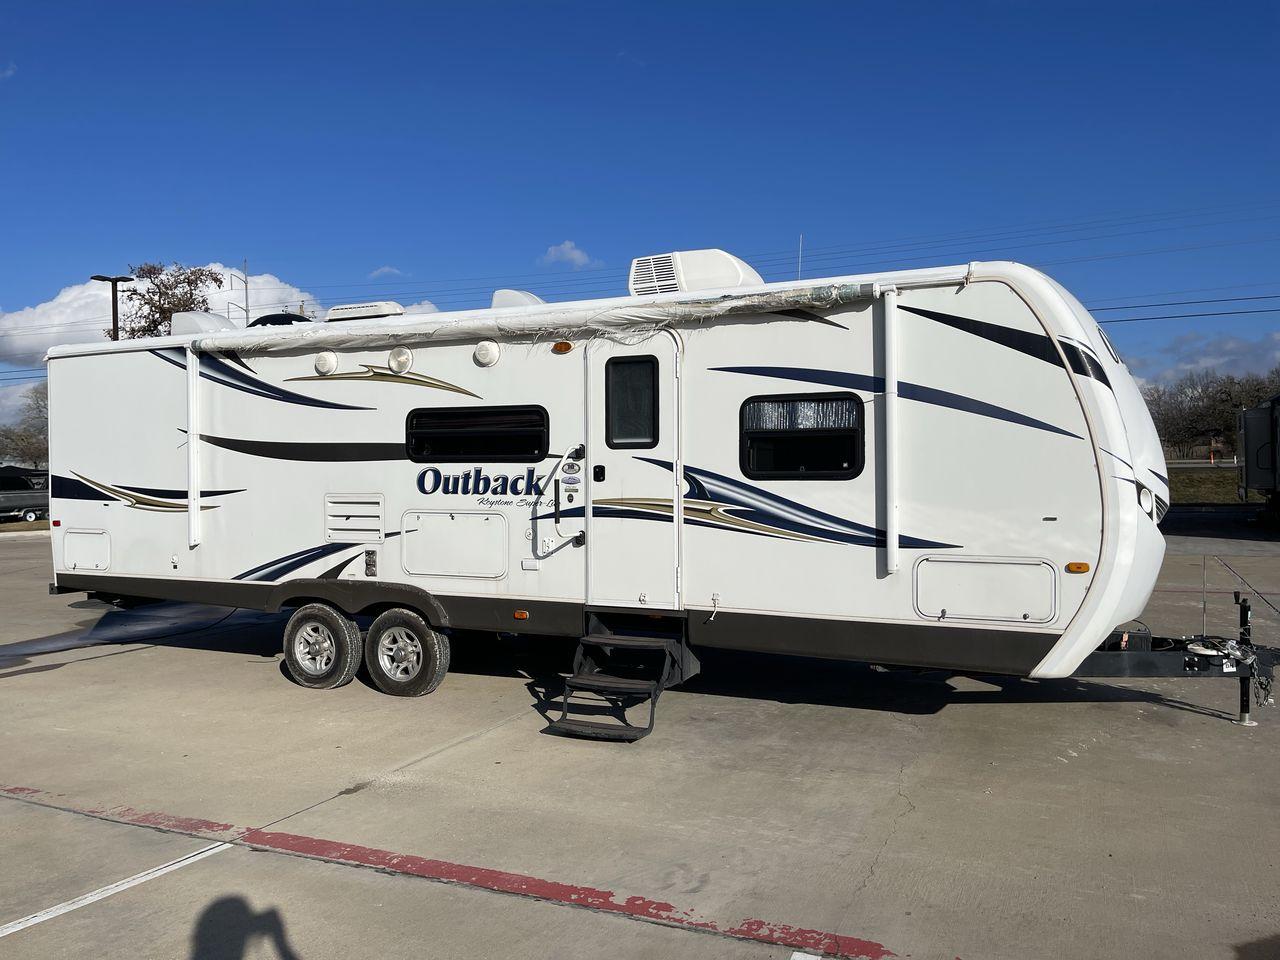 2012 WHITE KEYSTONE OUTBACK 292BH (4YDT29225CB) , Length: 32.75 | Dry Weight: 6,559 lbs. | Gross Weight: 8,200 lbs. | Slides: 1 transmission, located at 4319 N Main Street, Cleburne, TX, 76033, (817) 221-0660, 32.435829, -97.384178 - The 2012 Keystone Outback 292BH is a versatile and well-equipped travel trailer perfect for enjoyable family adventures. This model offers a great balance between spaciousness and towability, with a length of 32.75 feet and a dry weight of 6,559 pounds. With a single slide, the Outback 292BH provide - Photo #24